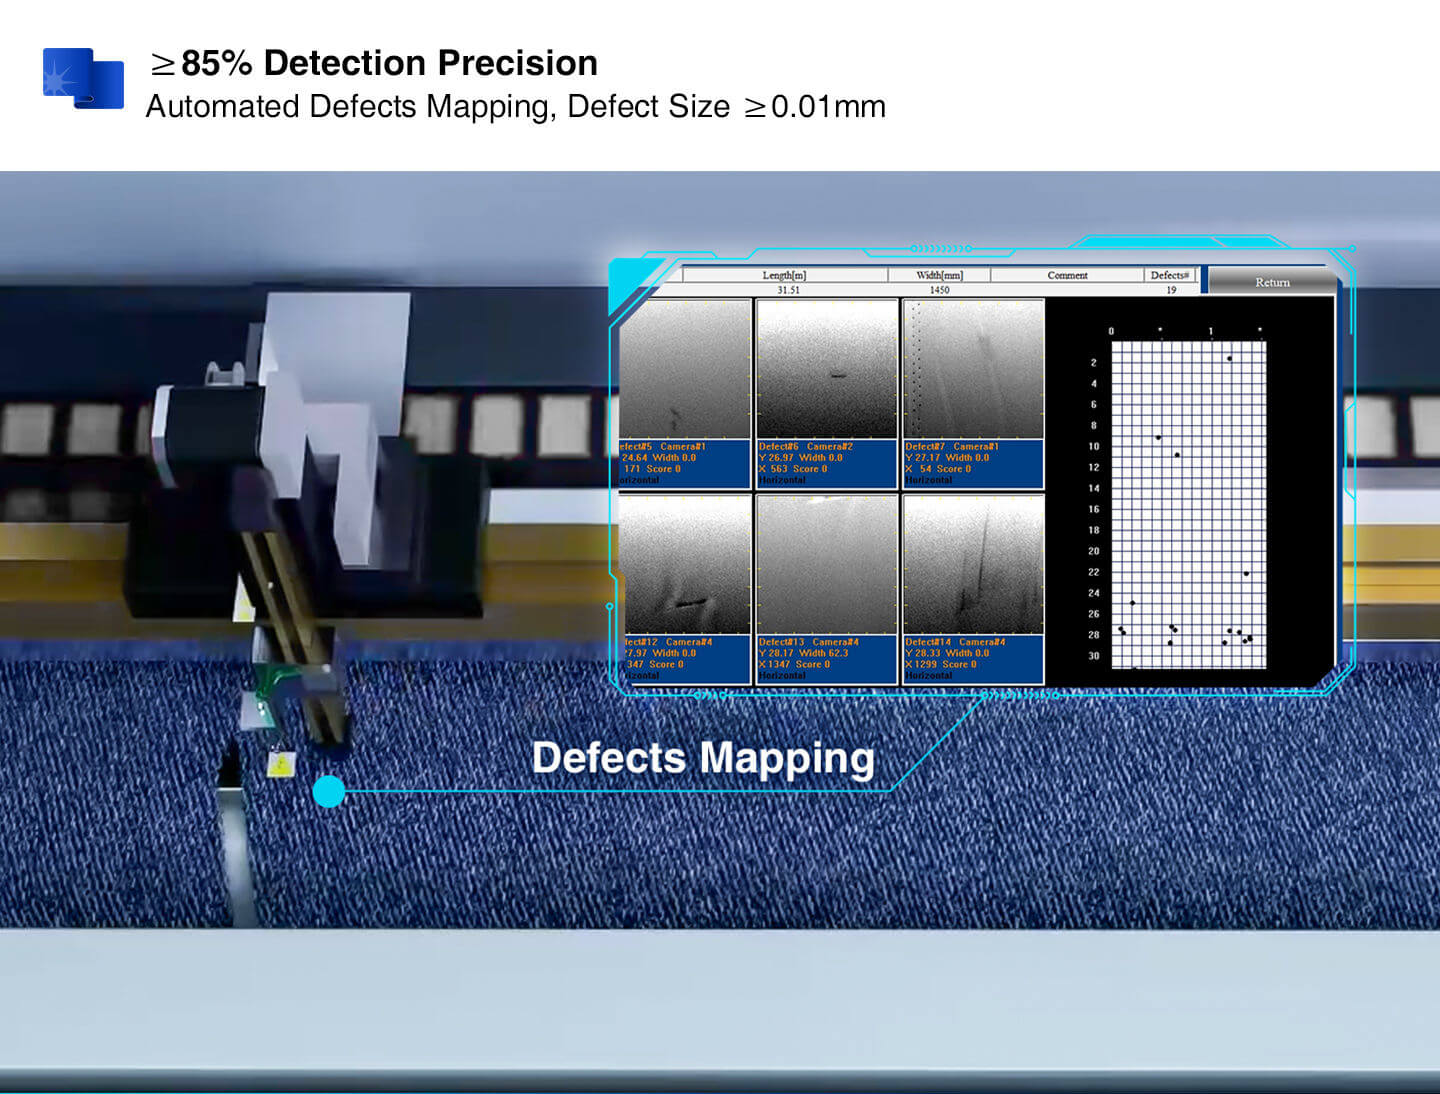 AI Automated Visual Inspection System detection precision have more than 85%